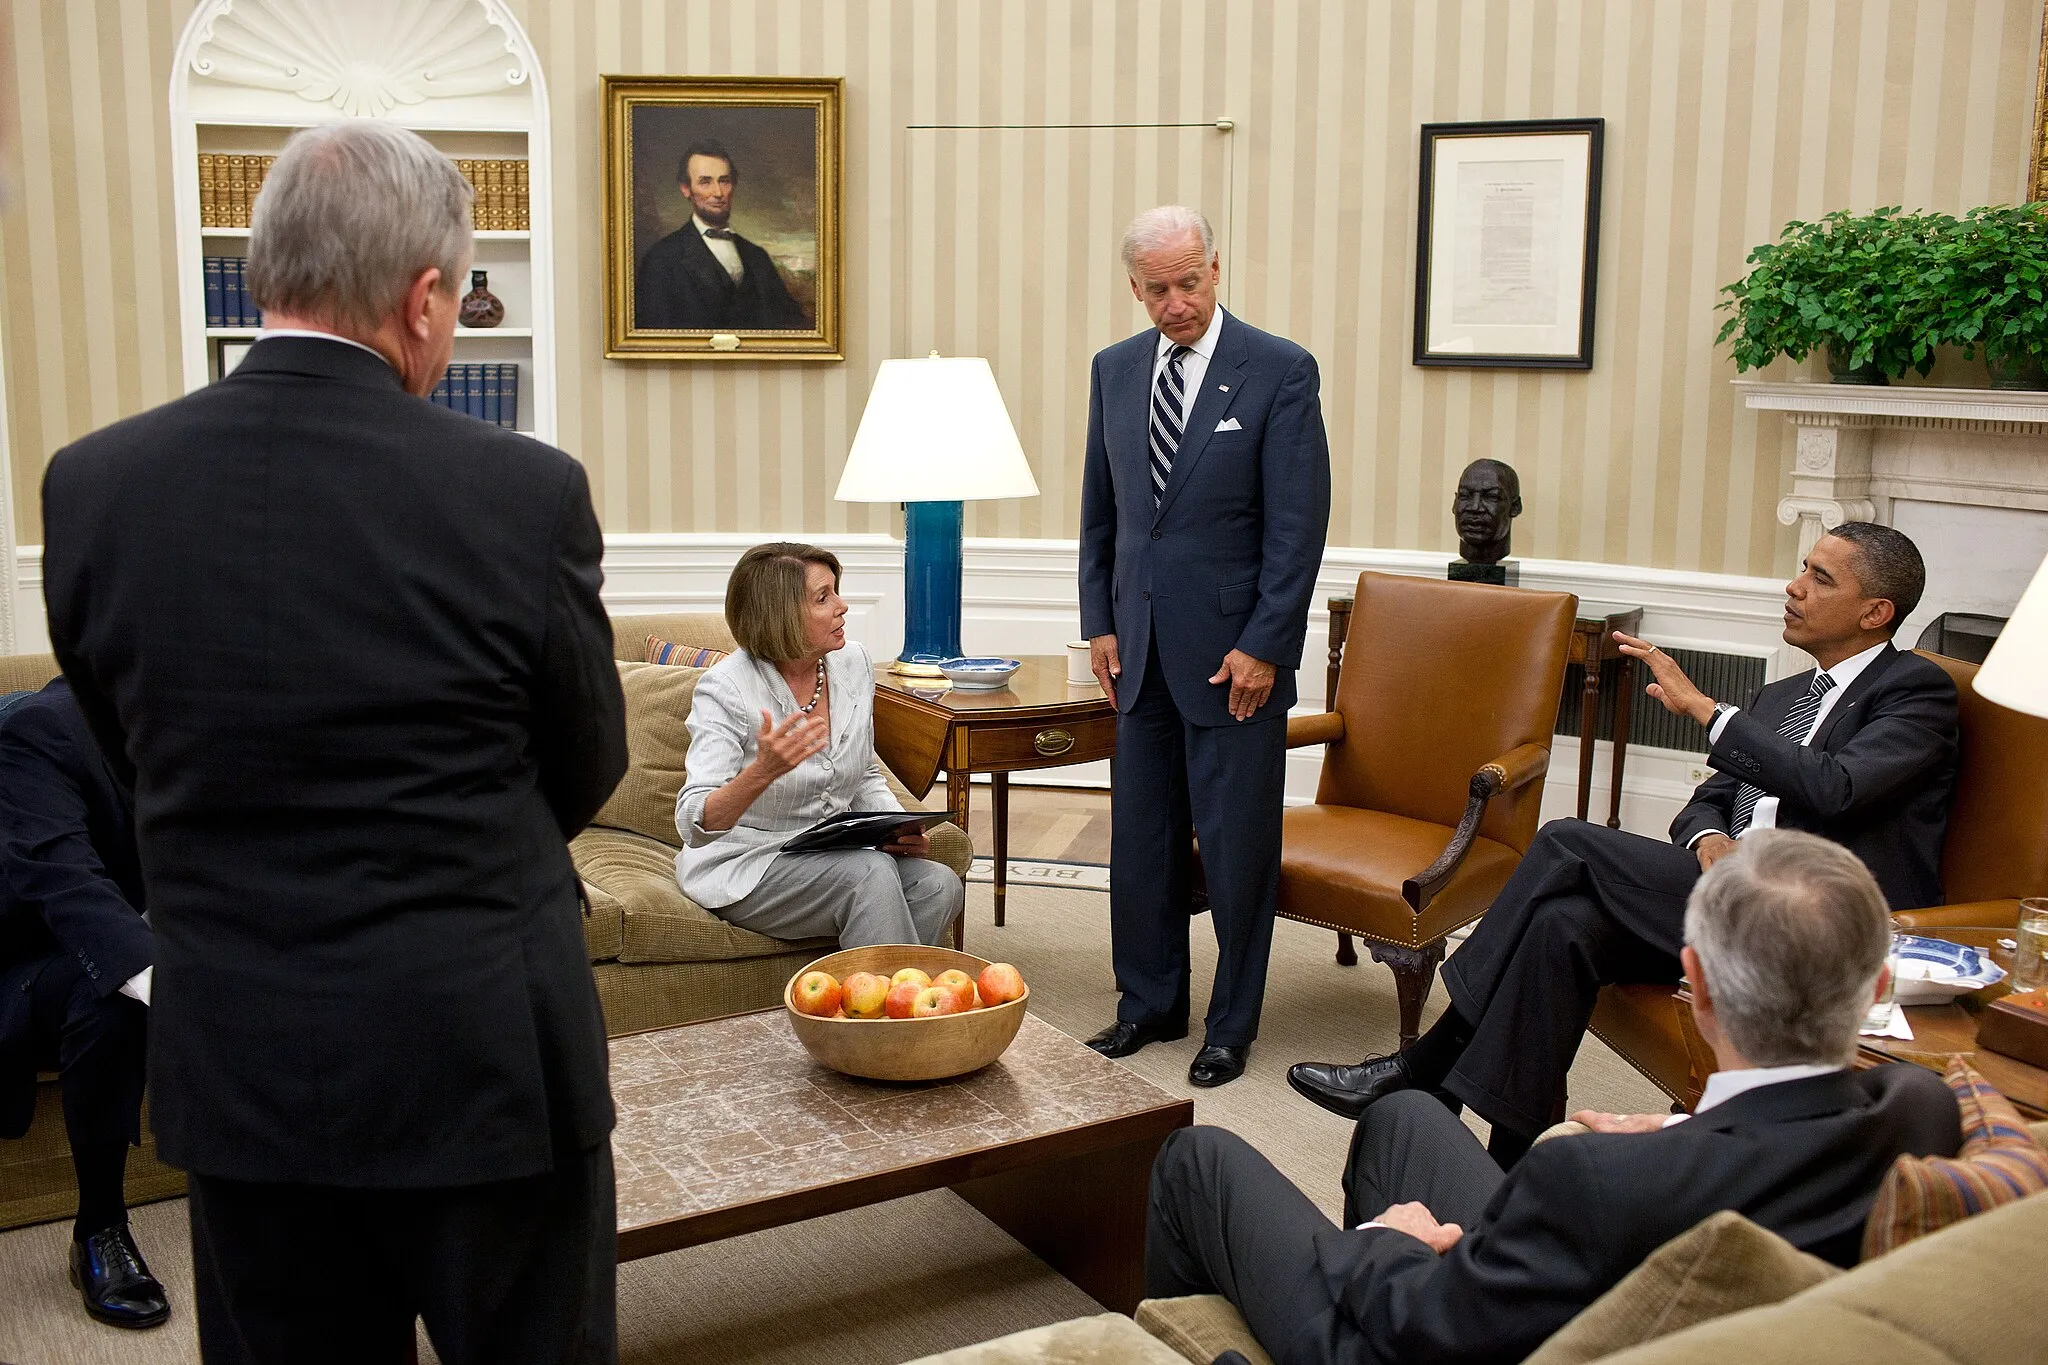 Photo showing: President Barack Obama and Vice President Joe Biden meet the Democratic leadership in the Oval Office to discuss ongoing efforts to find a balanced approach to the debt limit and deficit reduction, July 21, 2011. Pictured, from left, are: Senate Majority Whip Dick Durbin, House Minority Leader Nancy Pelosi, and Senate Majority Leader Harry Reid. (Official White House Photo by Pete Souza)